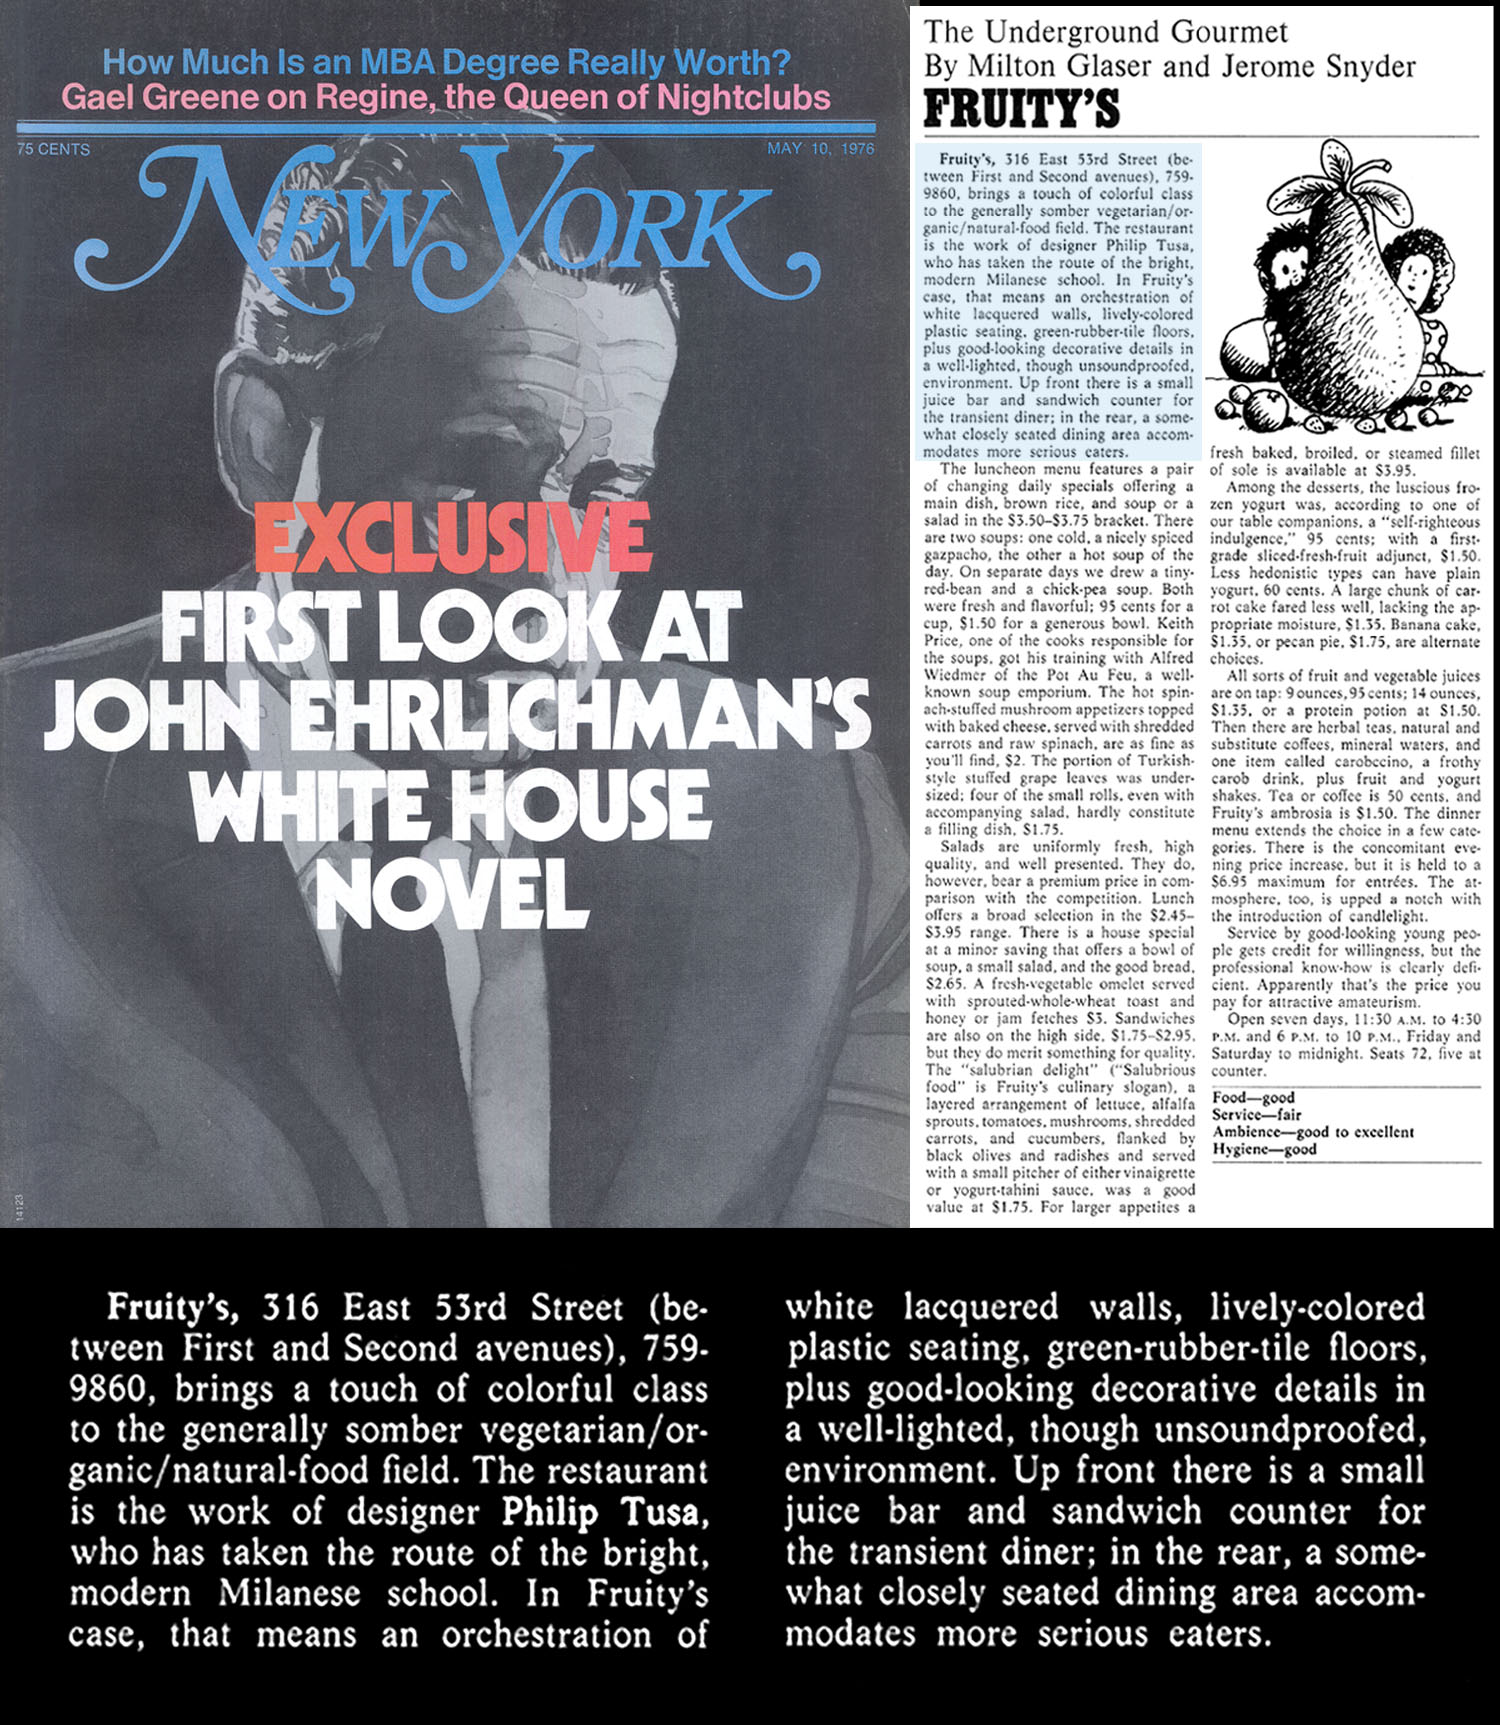 New York Magazine Review (5/10/76) page 86; Fruity's Restaurant